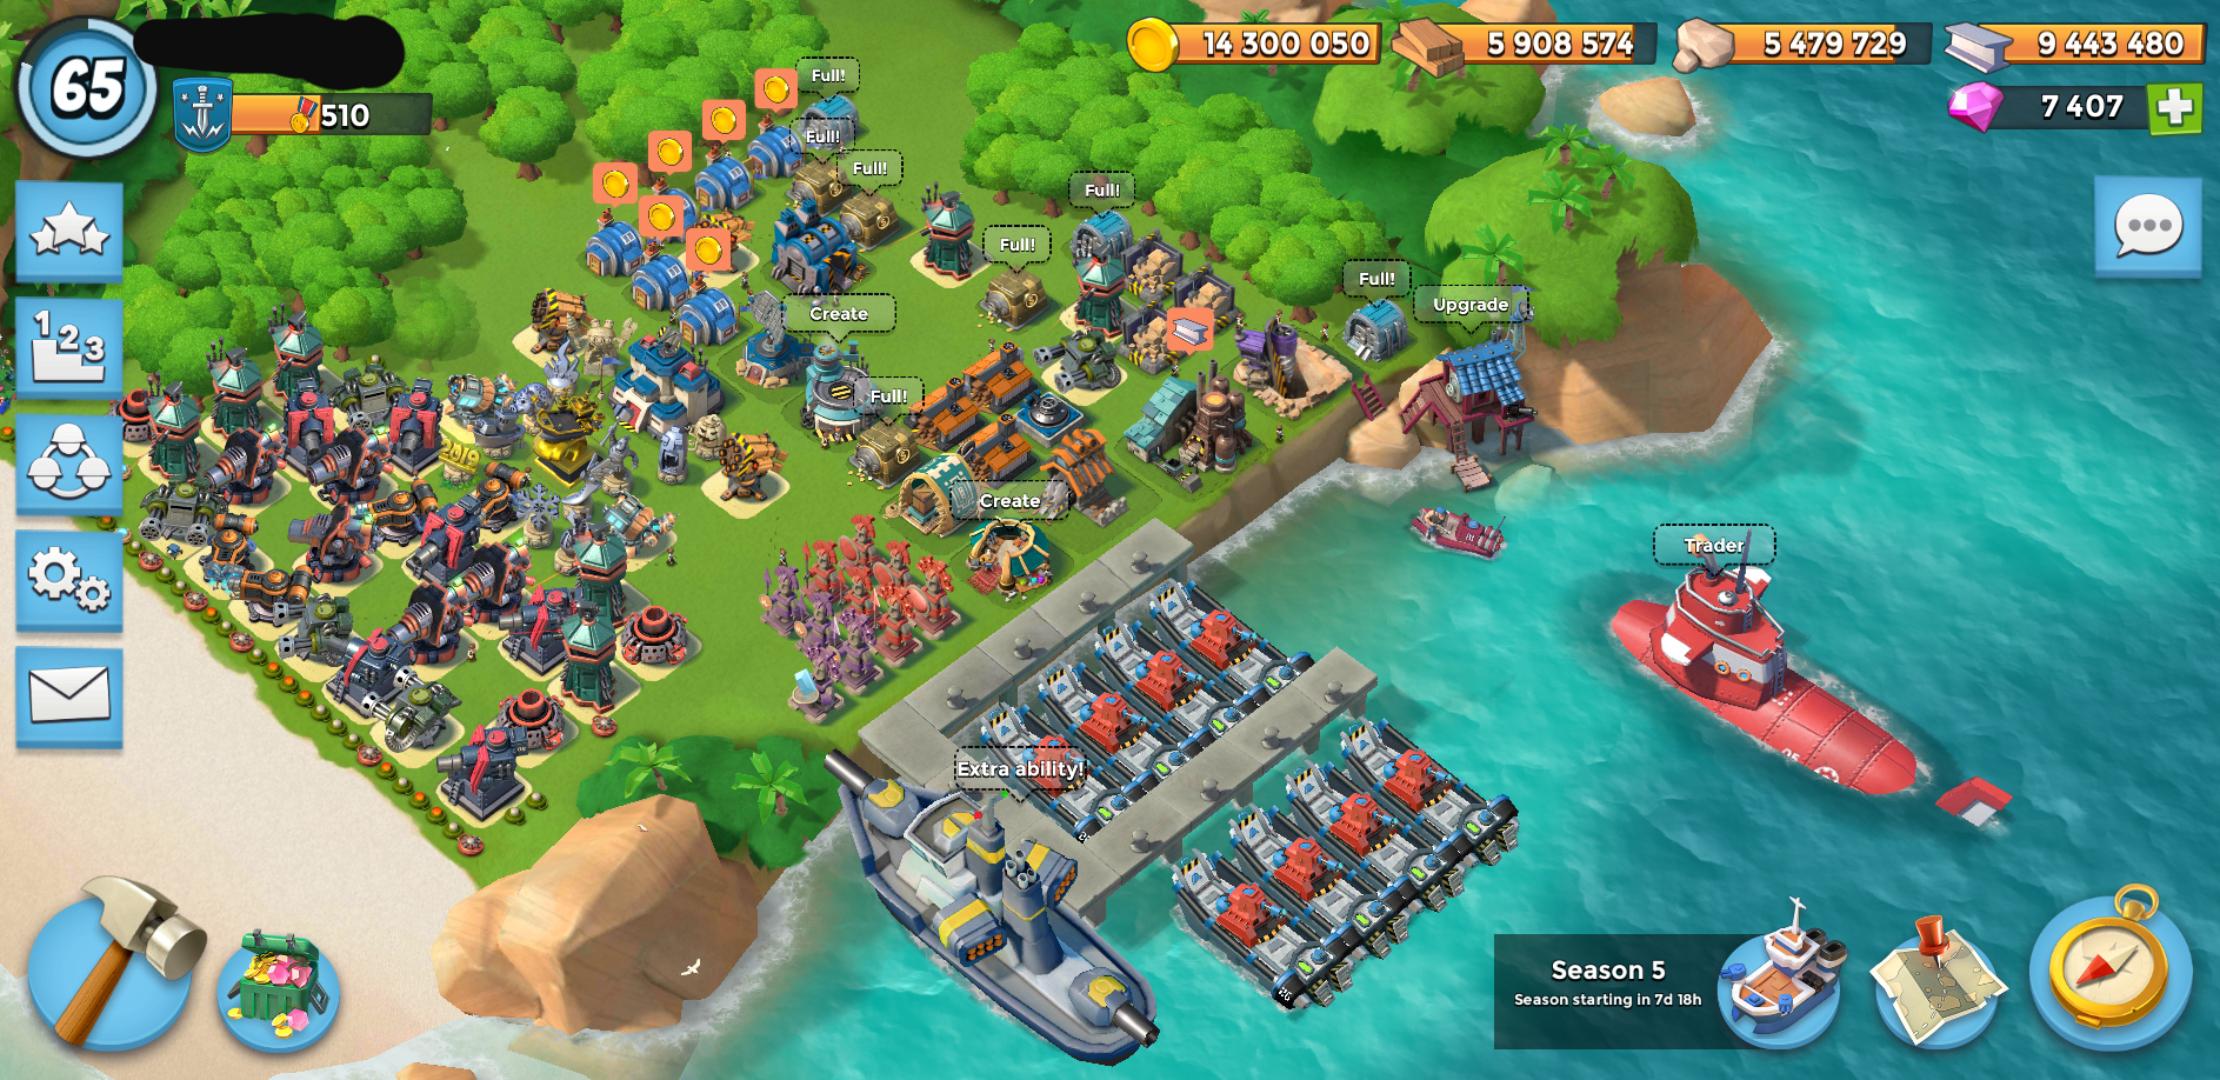 How to get Free Diamonds In Boom Beach